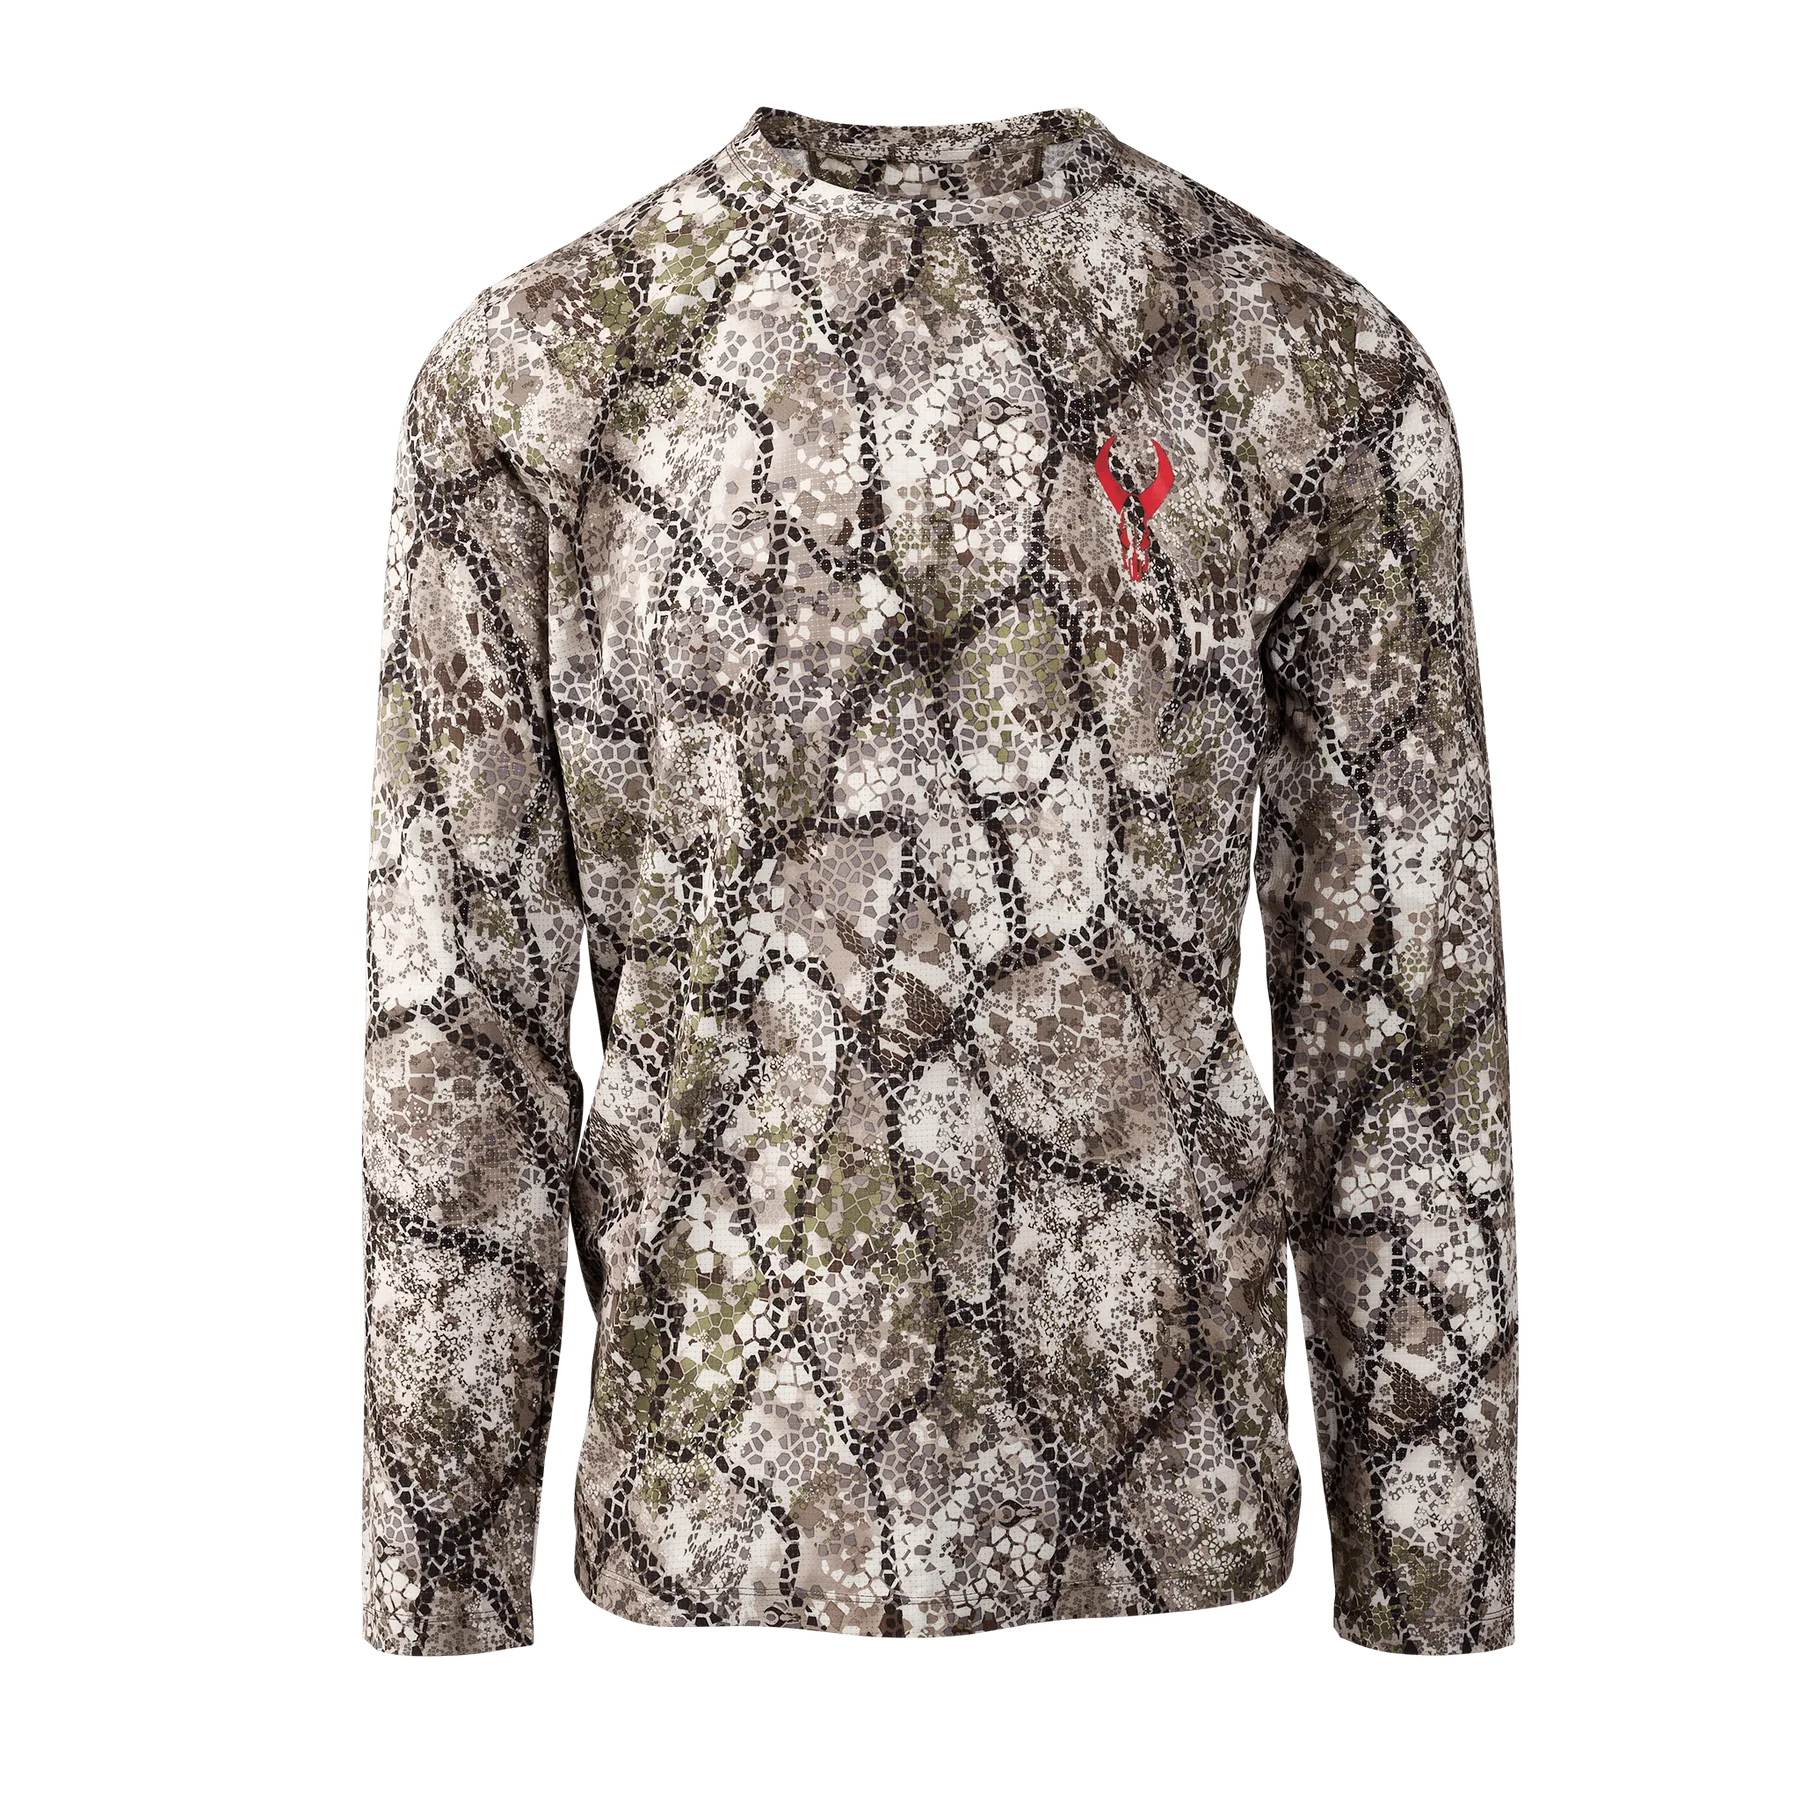 Badlands Andaire Long Sleeve